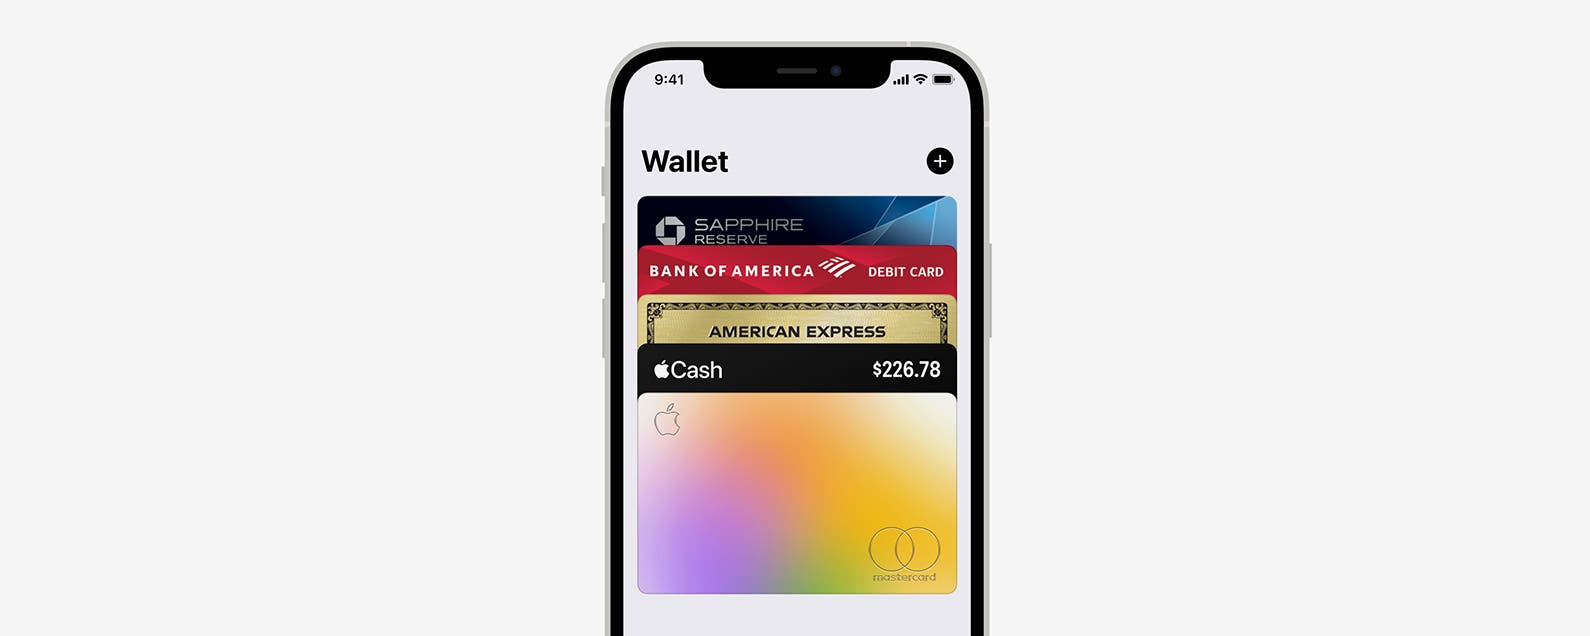 What Is Apple Wallet?